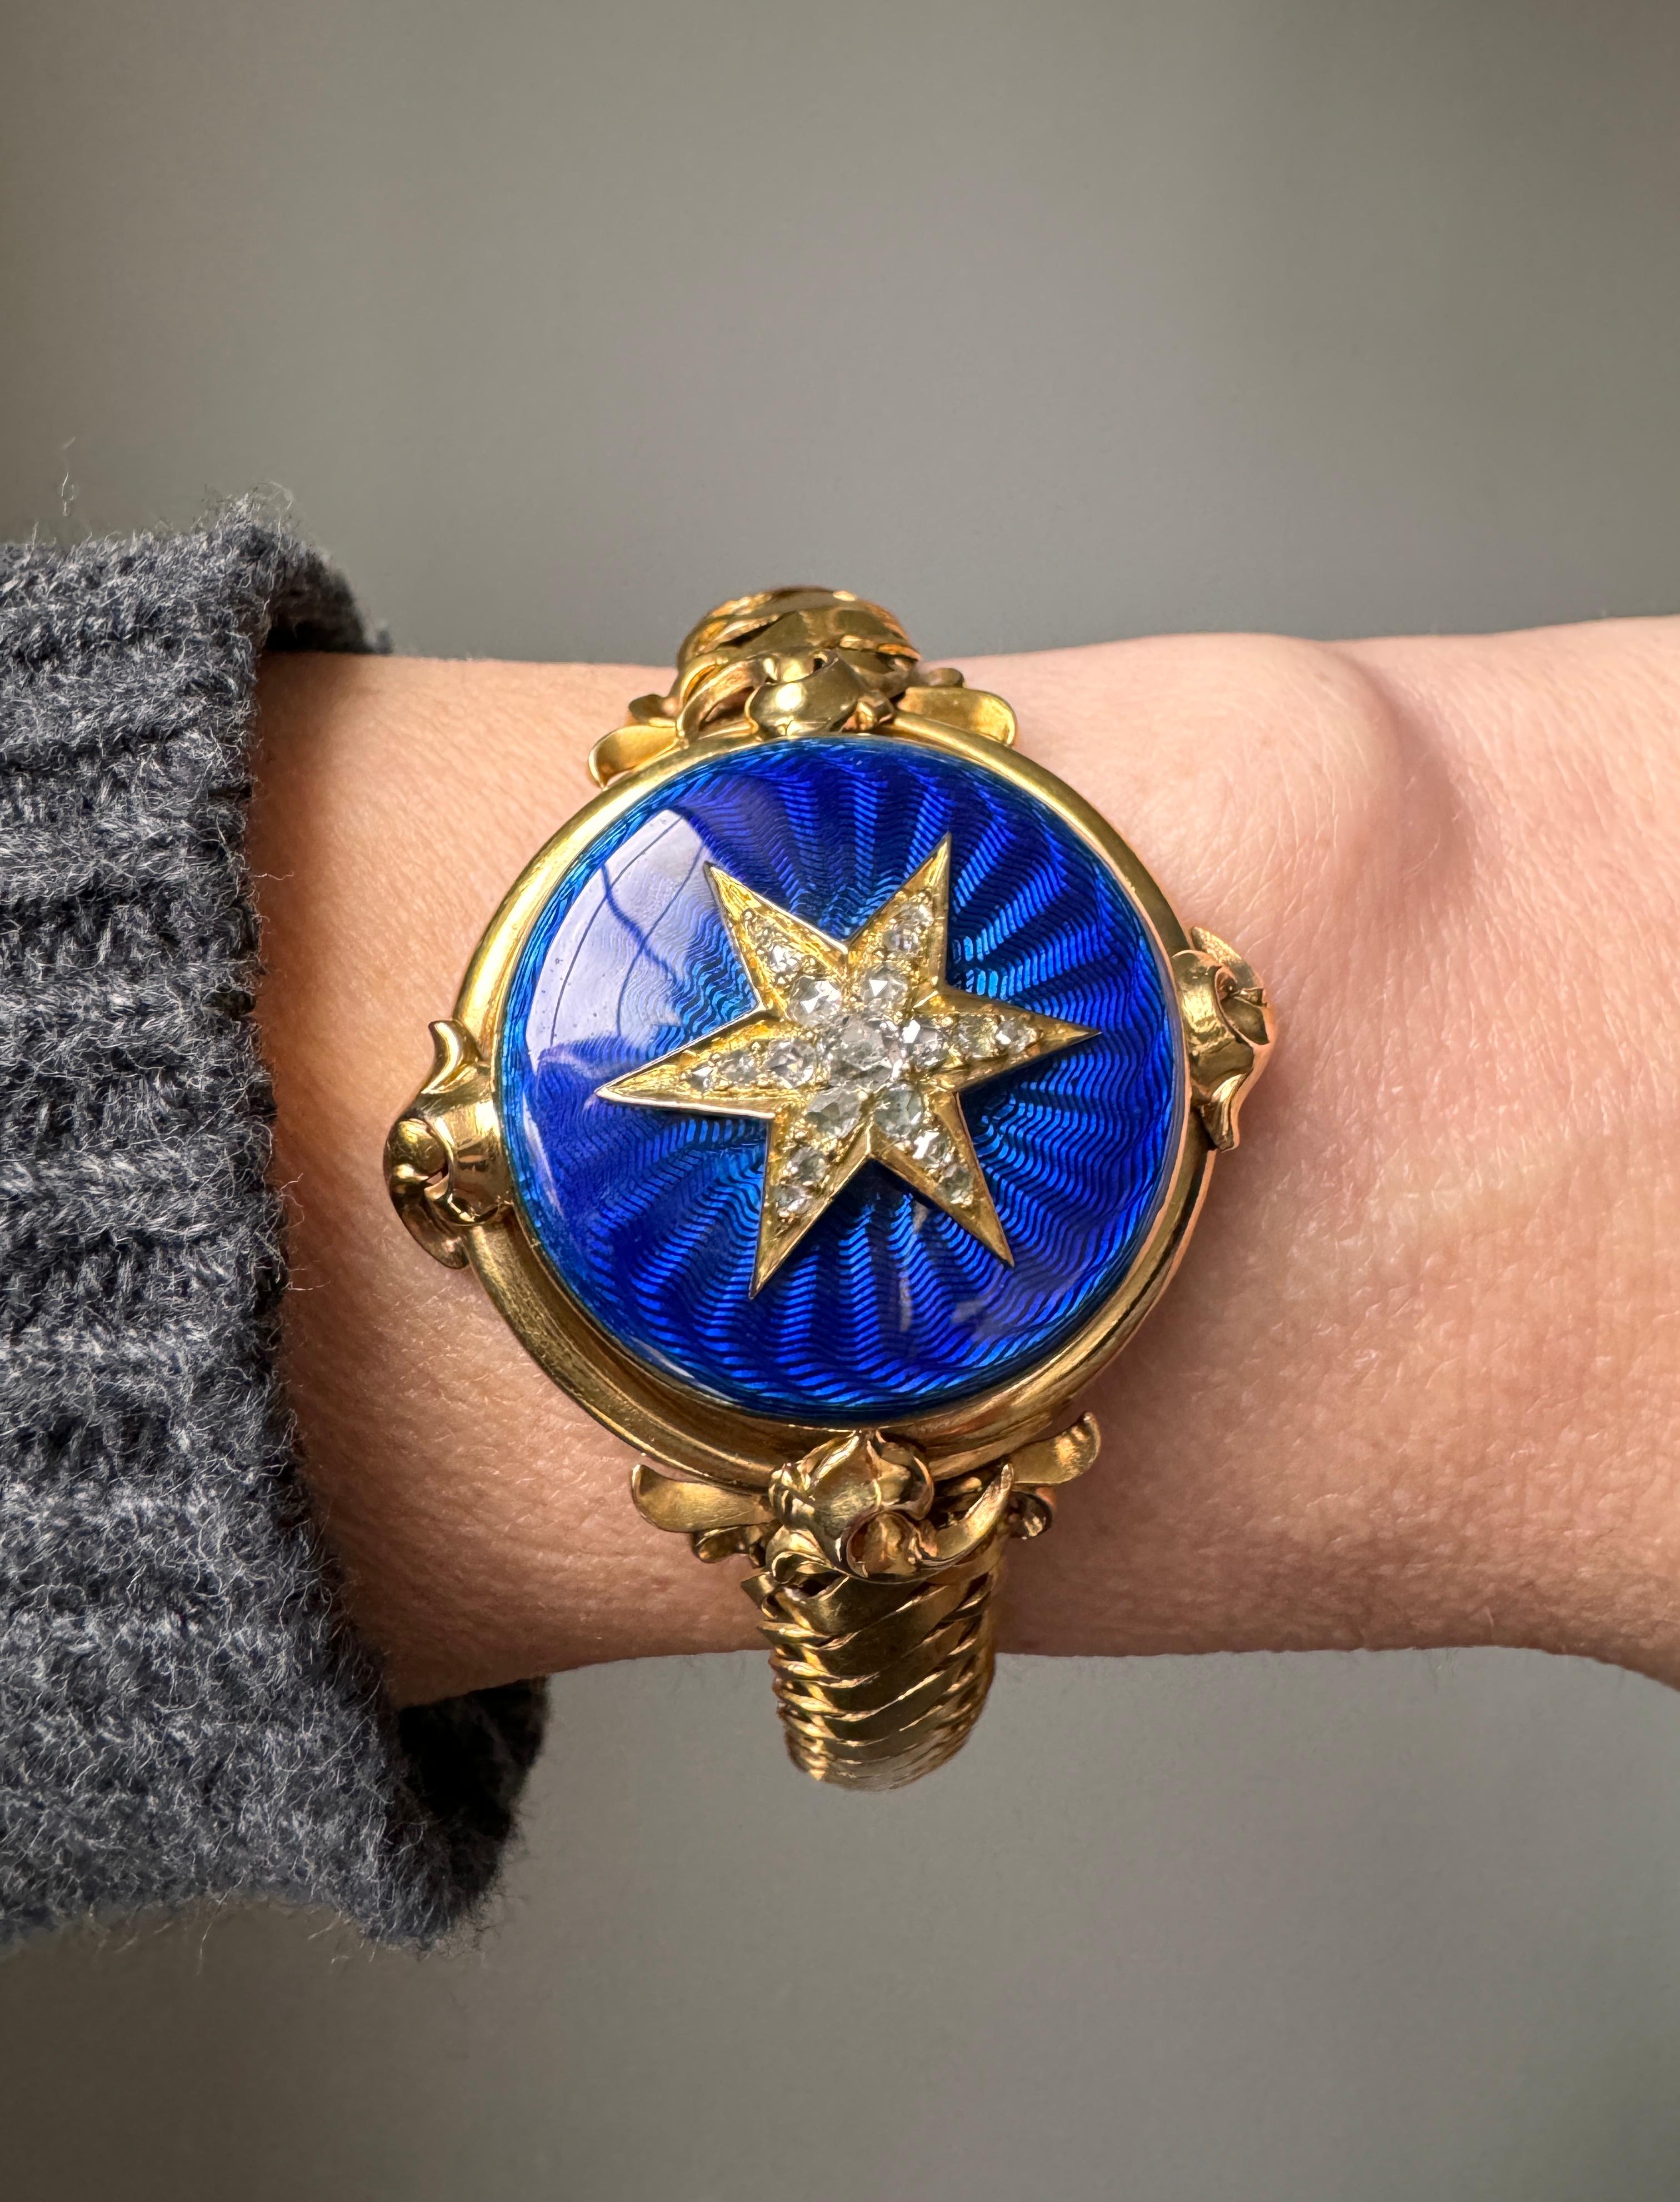 This exceptional antique locket bracelet, circa 1870s, sparkles with a six-rayed diamond-set star mounted atop a cobalt blue guilloche enamel cover. The supple S-link bracelet culminates in a concealed push clasp with safety chain. Fits a petite 6